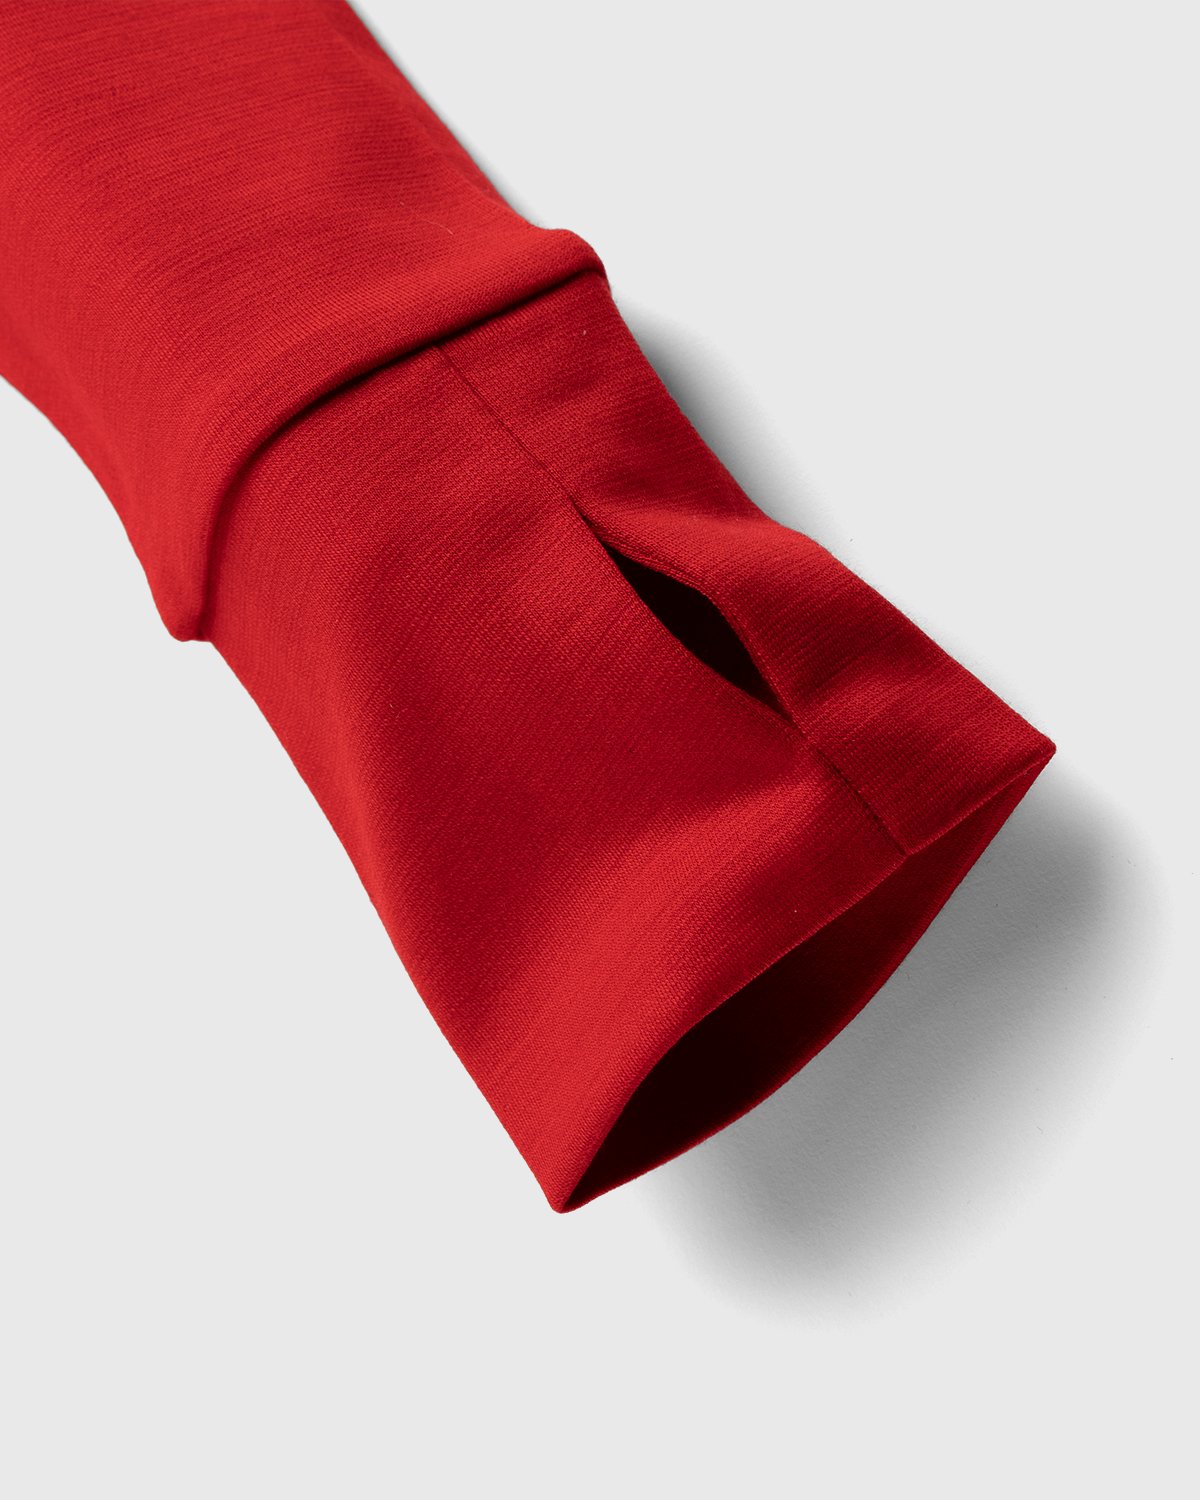 Phipps - Turtleneck Flame - Clothing - Red - Image 4